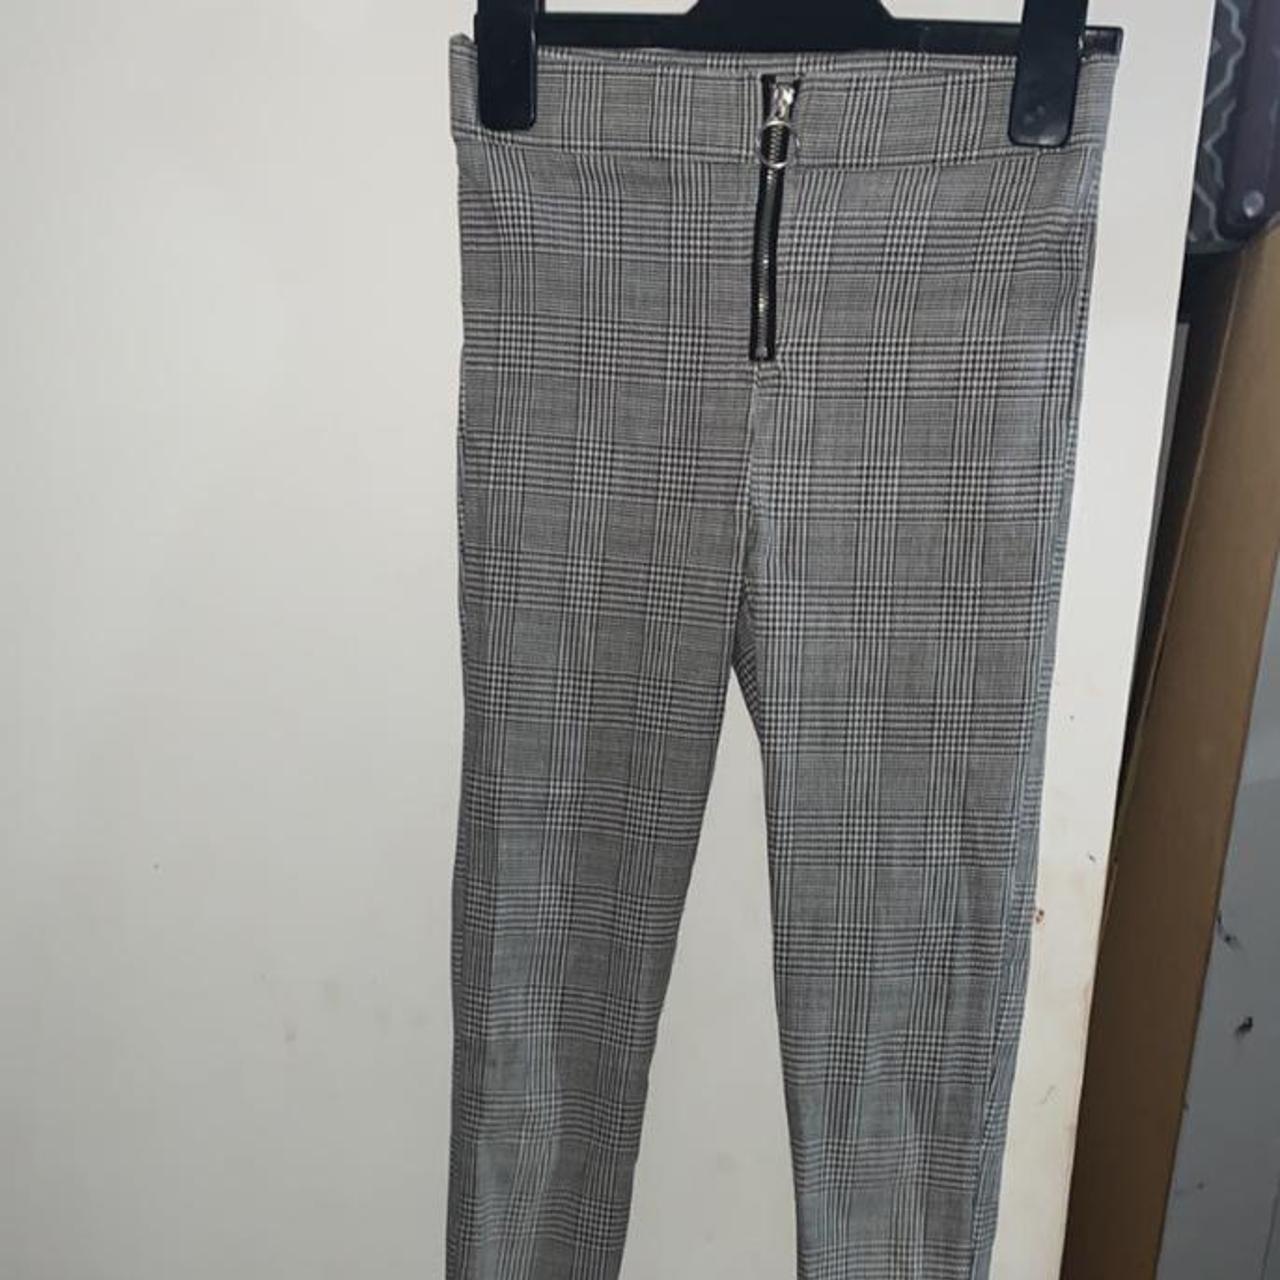 These are black-and-white chequered skinny pants - Depop